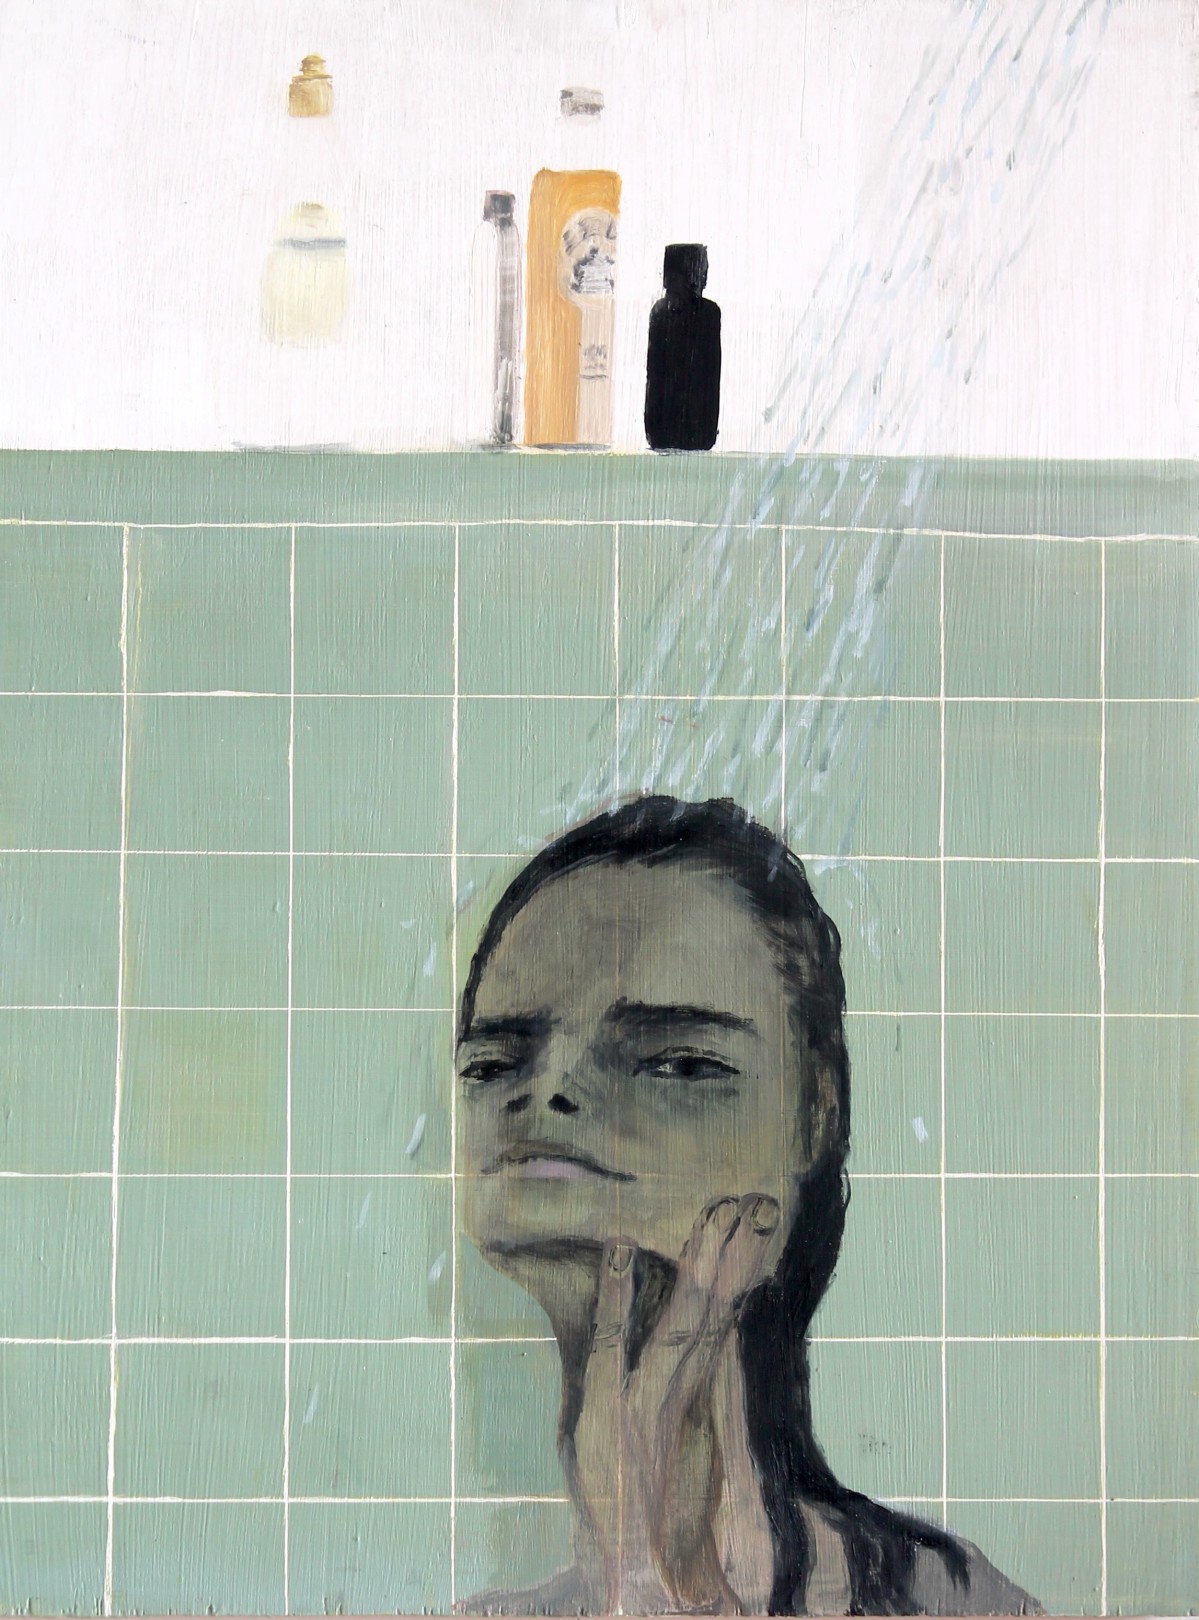 Aubrey Levinthal Long Shower (Lady), 2020 Oil on panel 60 x 46 cm. / 24 x 18 in. Courtesy Monya Rowe Gallery and copyright of the artist